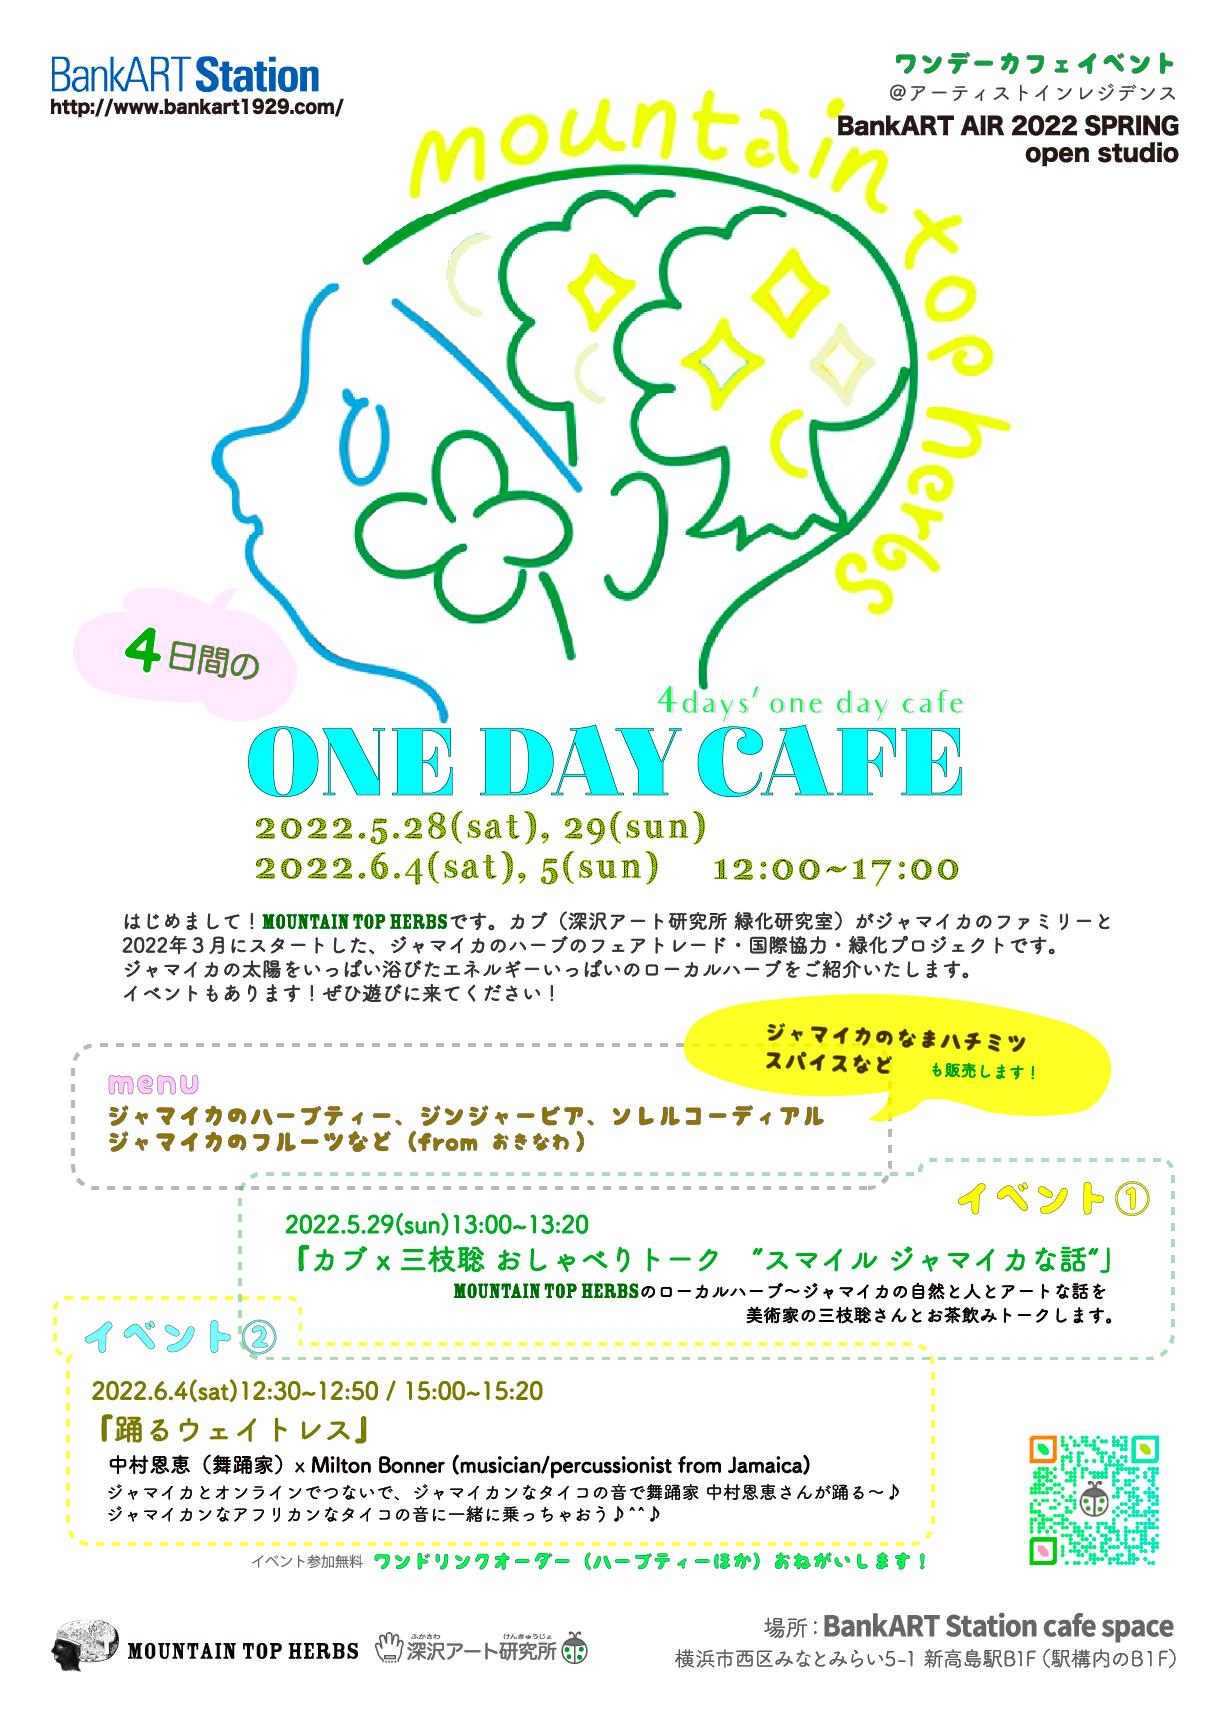 4 days ONE DAY CAFE @BankART